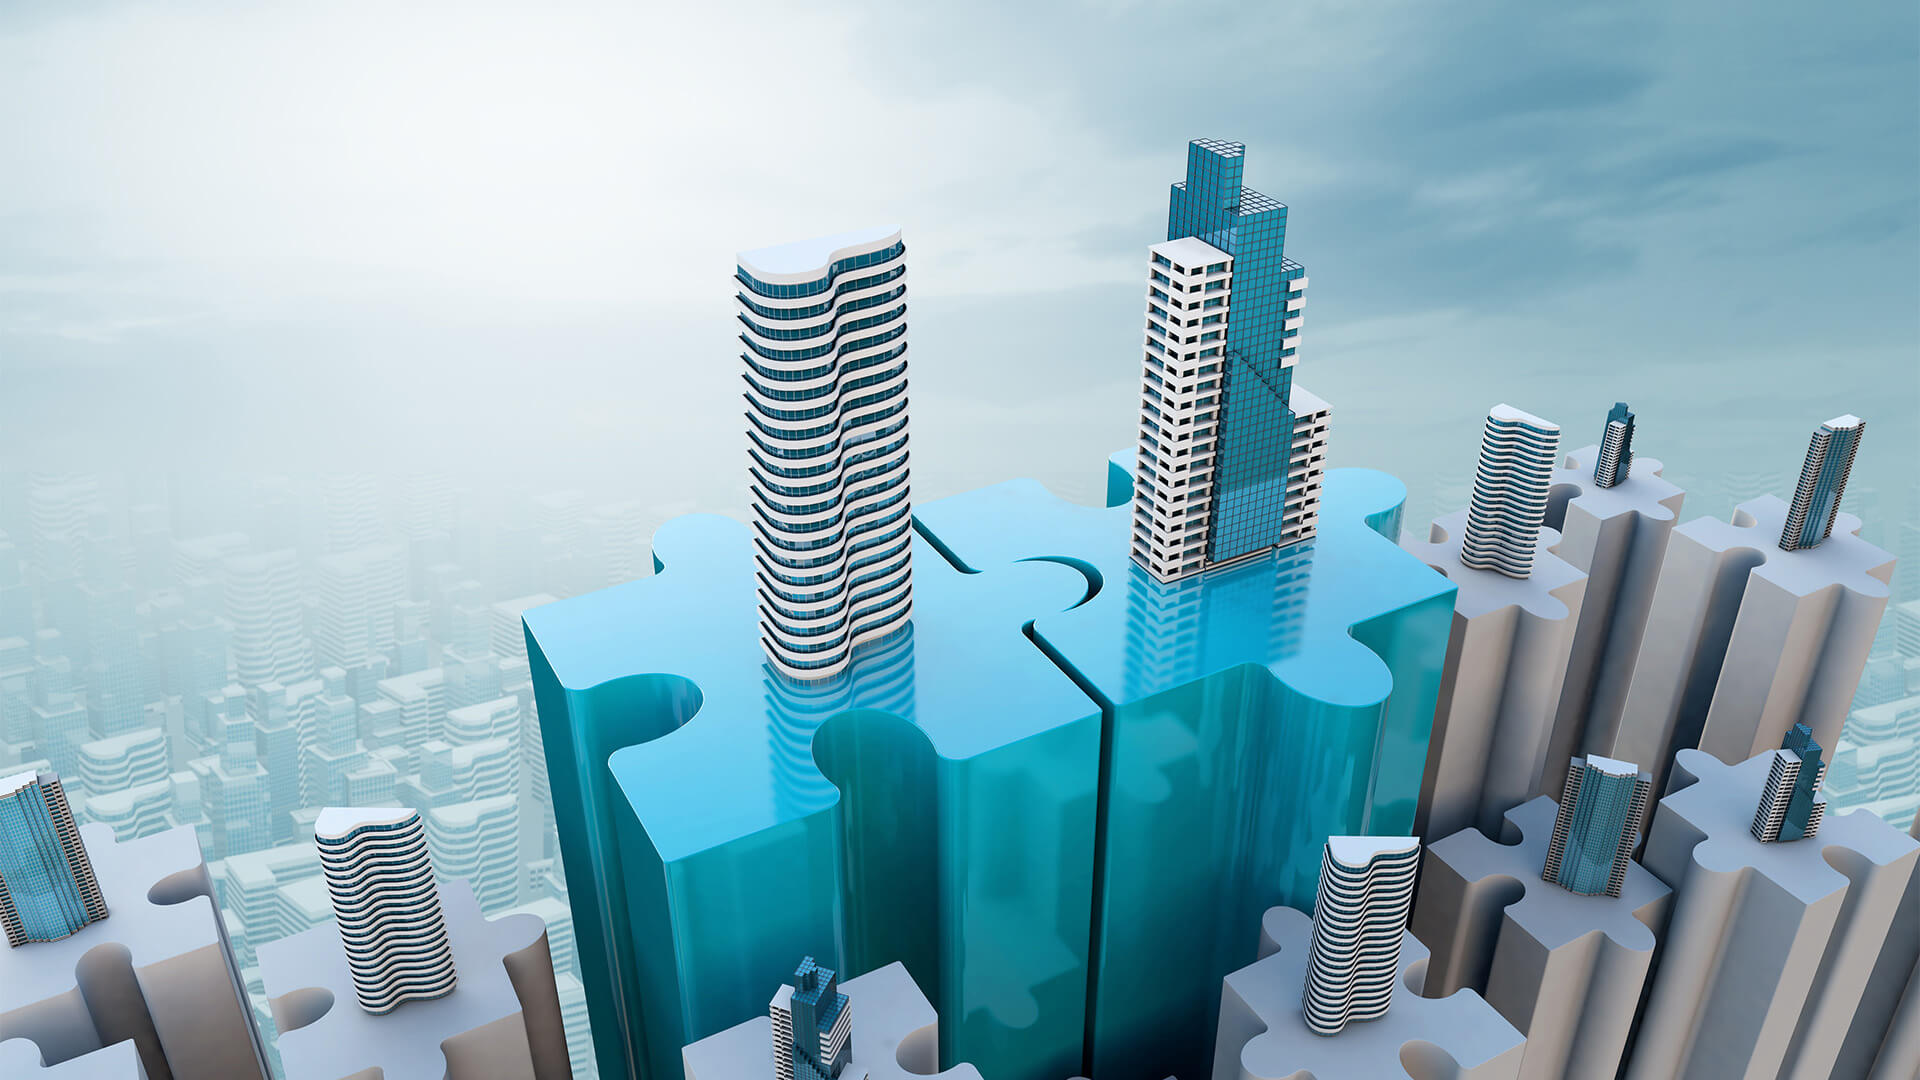 3D rendered puzzle pieces with skyscrapers on top and around them